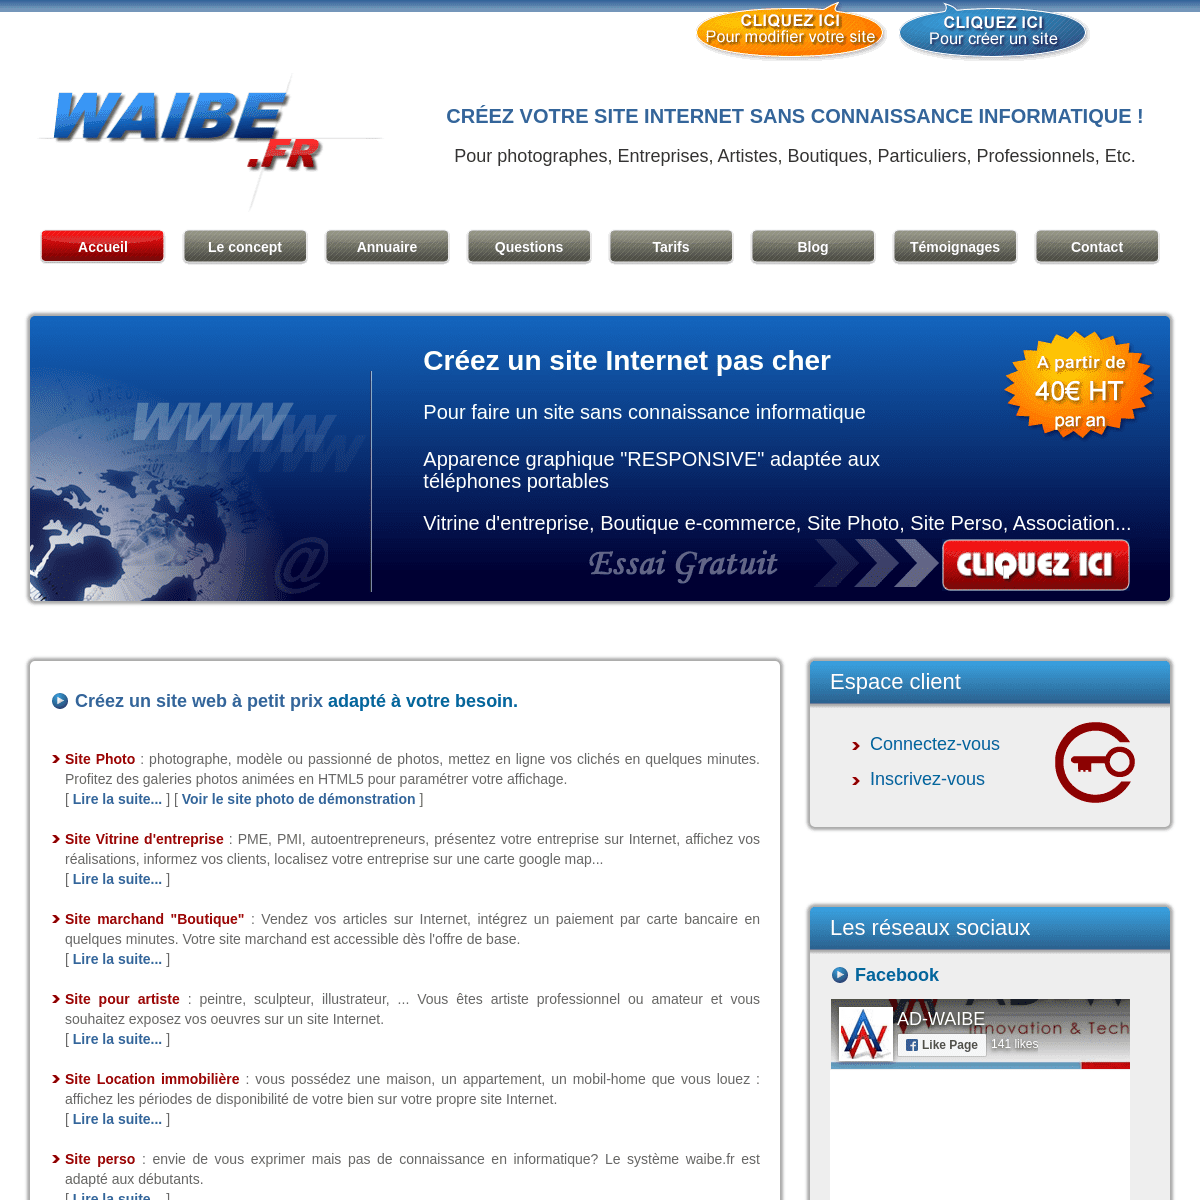 A complete backup of https://waibe.fr